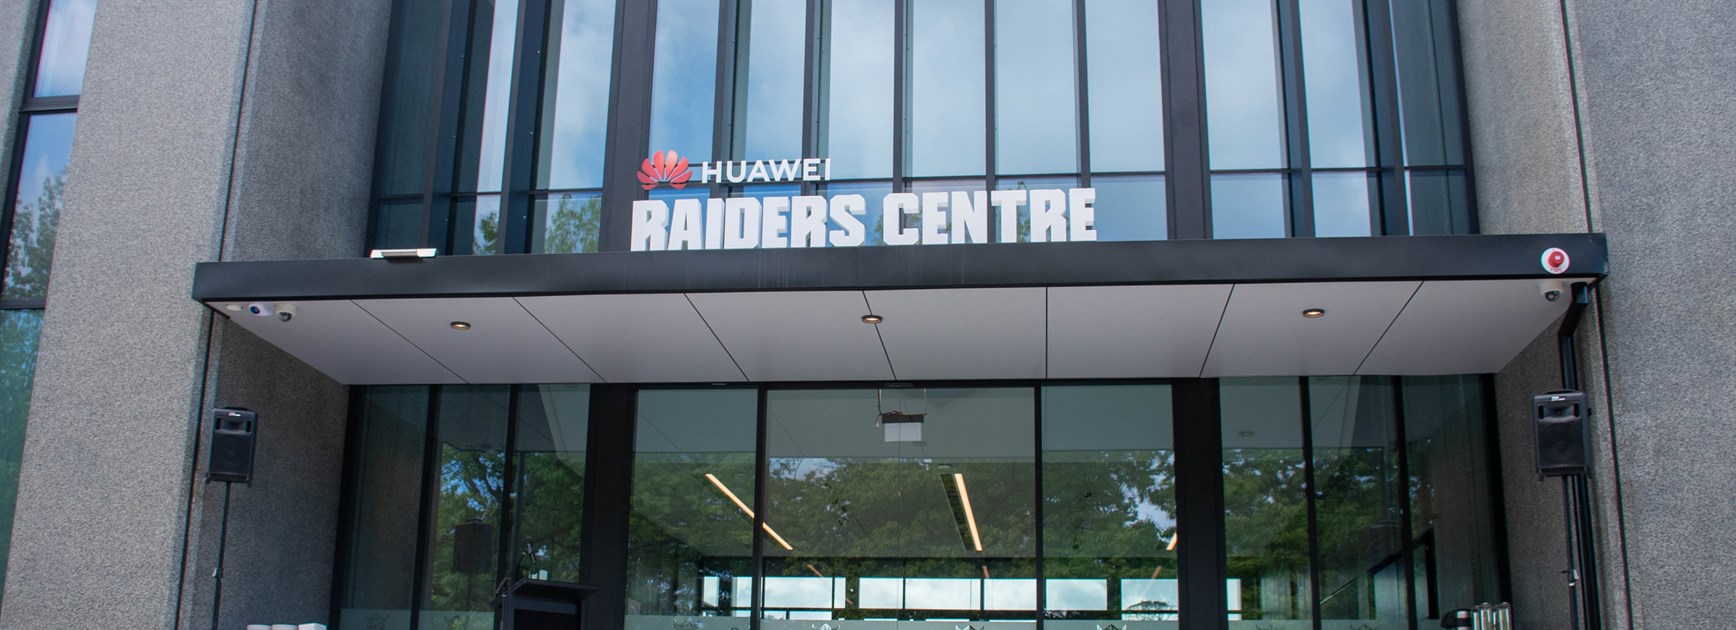 Official opening of Huawei Raiders Centre